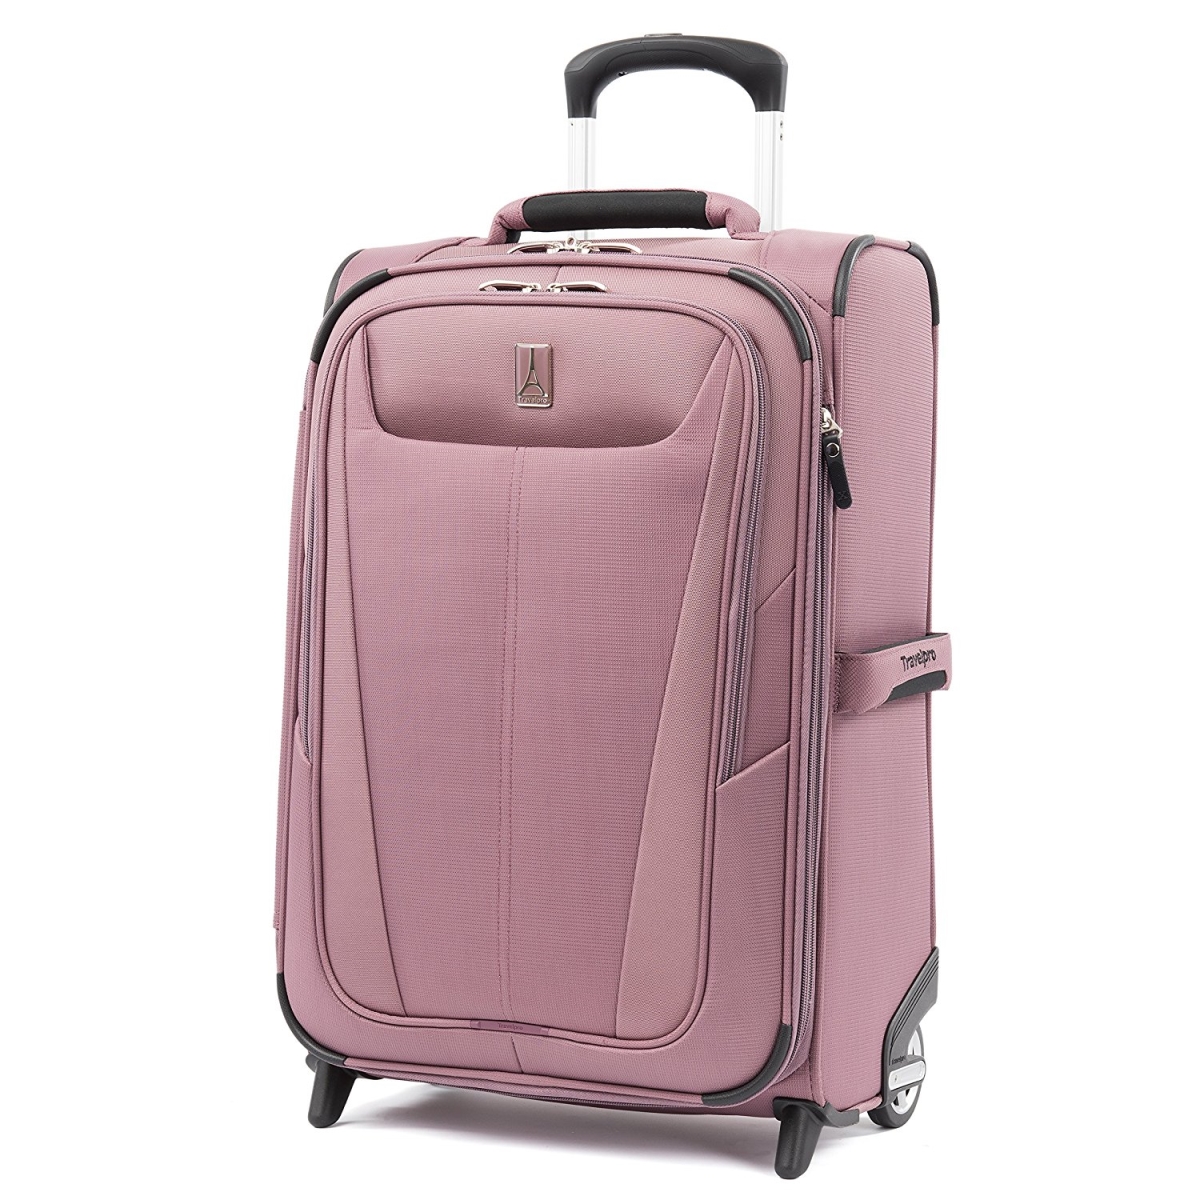 401174307 International Expandable Carry-on Rollaboard - Dusty Rose